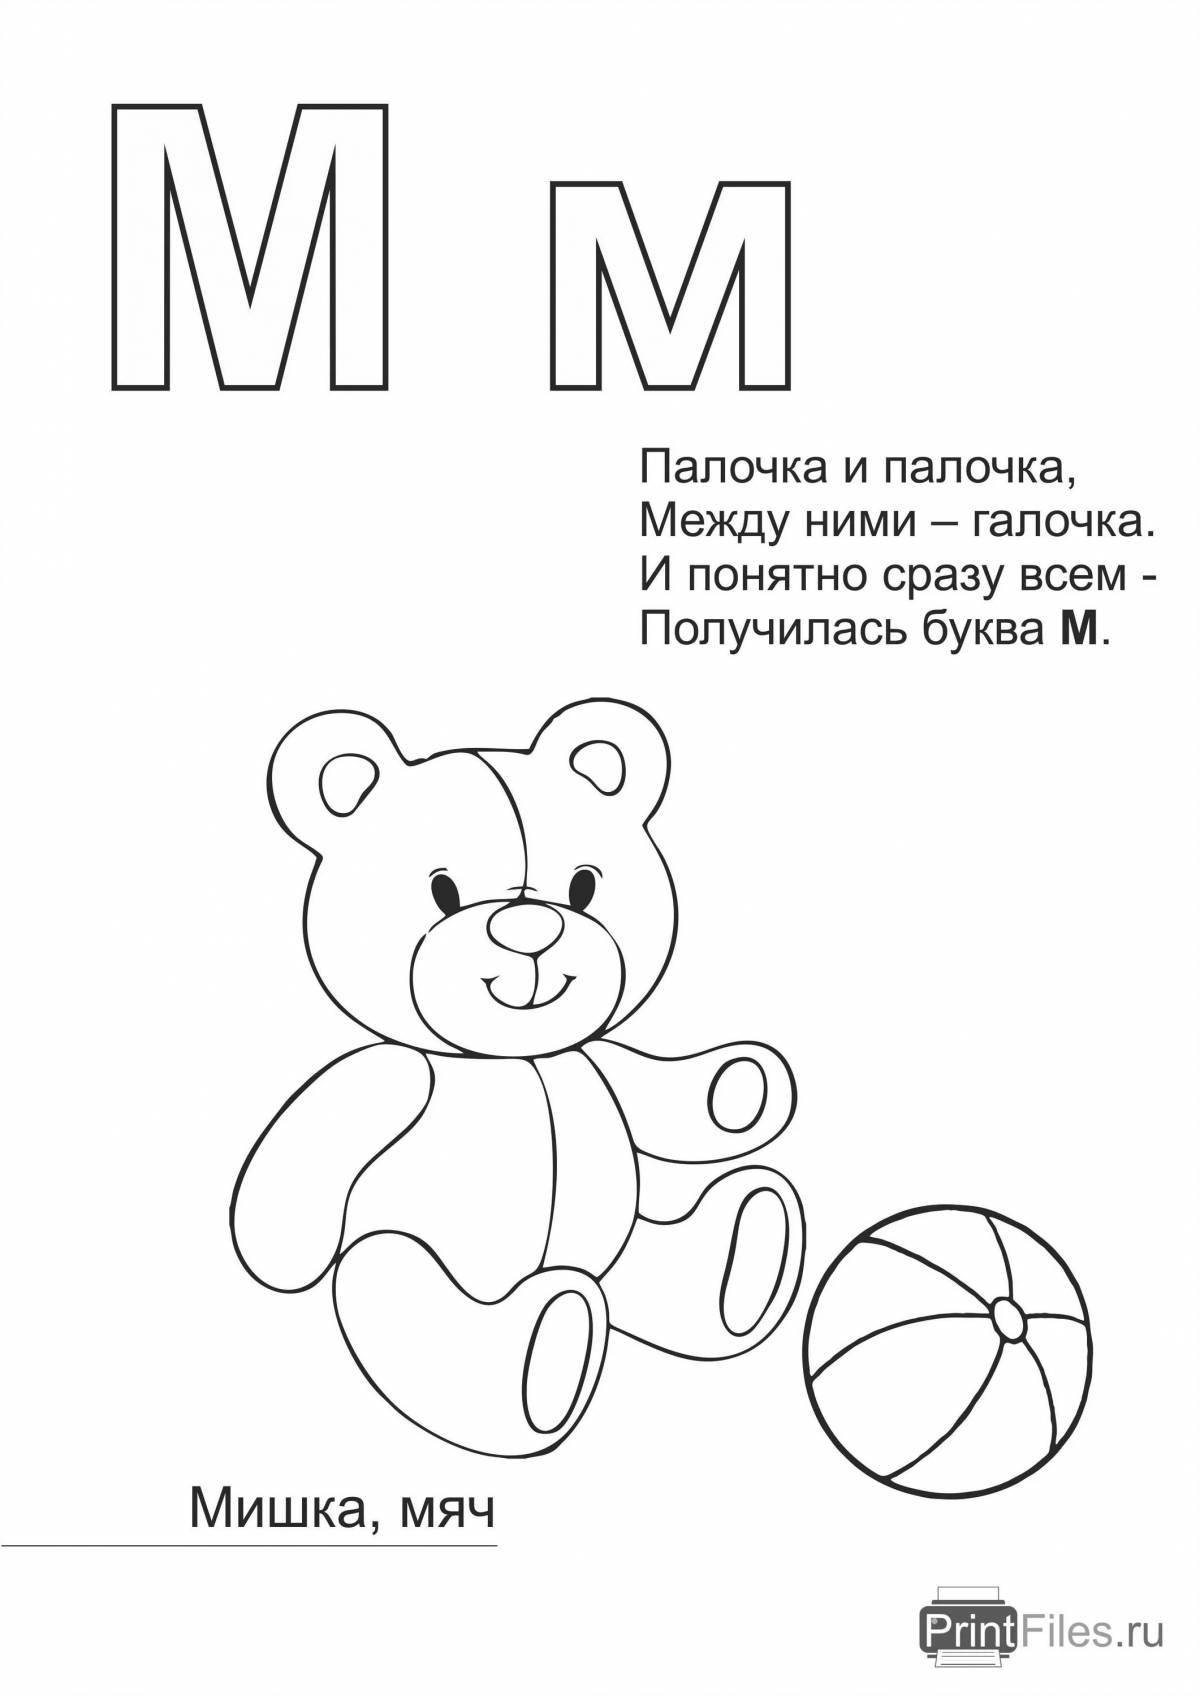 Colorful m sound coloring book for kids